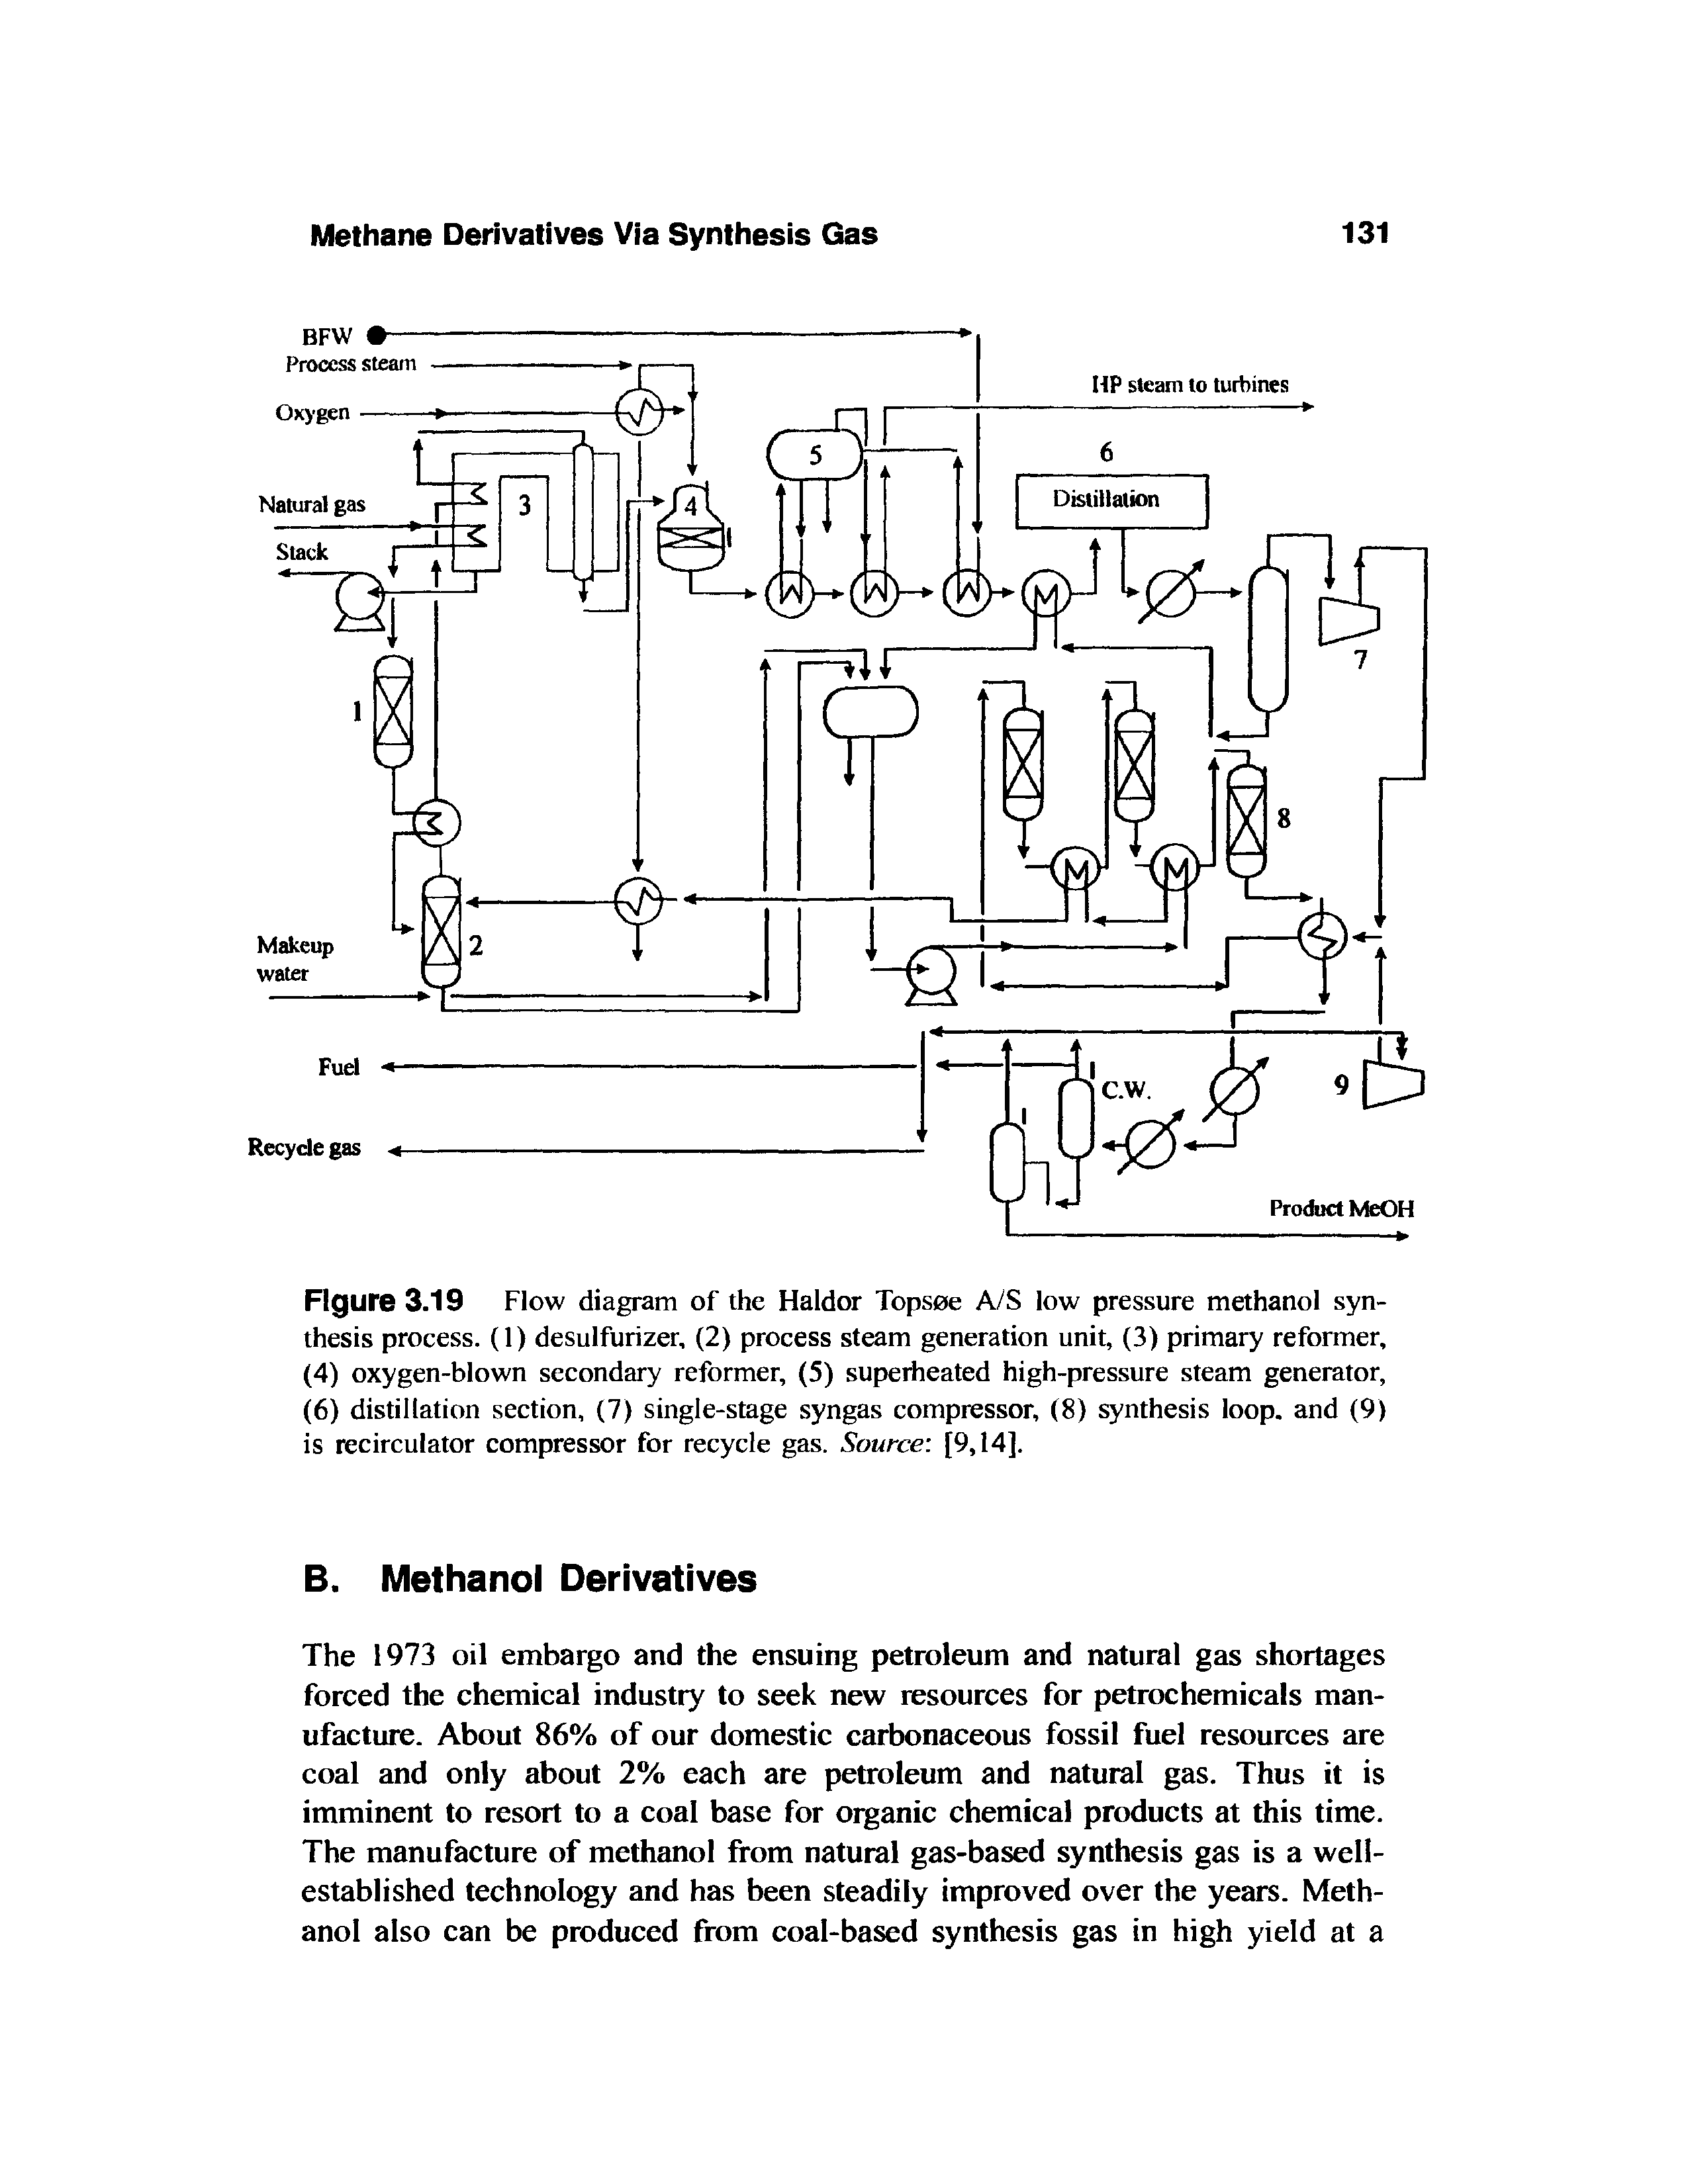 Figure 3.19 Flow diagram of the Haldor Topsoe A/S low pressure methanol synthesis process. (1) desulfurizer, (2) process steam generation unit, (3) primary reformer, (4) oxygen-blown secondary reformer, (5) superheated high-pressure steam generator, (6) distillation section, (7) single-stage syngas compressor, (8) synthesis loop, and (9) is recirculator compressor for recycle gas. Source [9,14],...